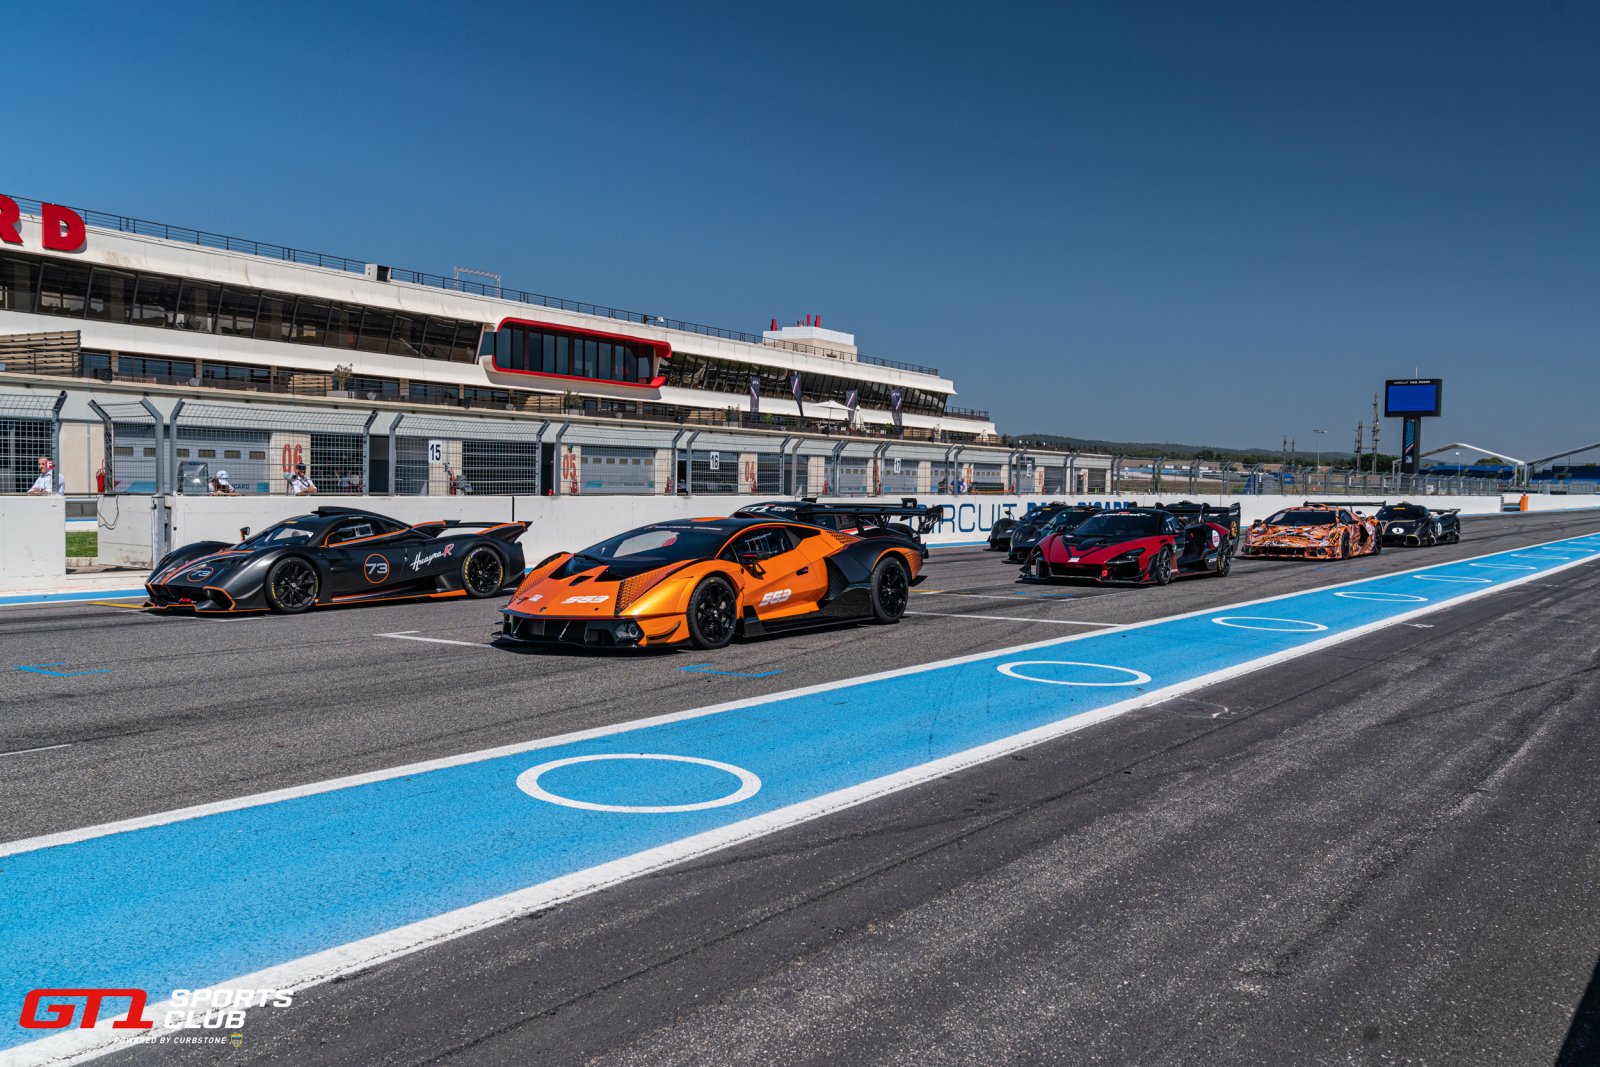 Growing grid of impressive machinery for the Barcelona meeting of the 2022 GT1 Sports Club